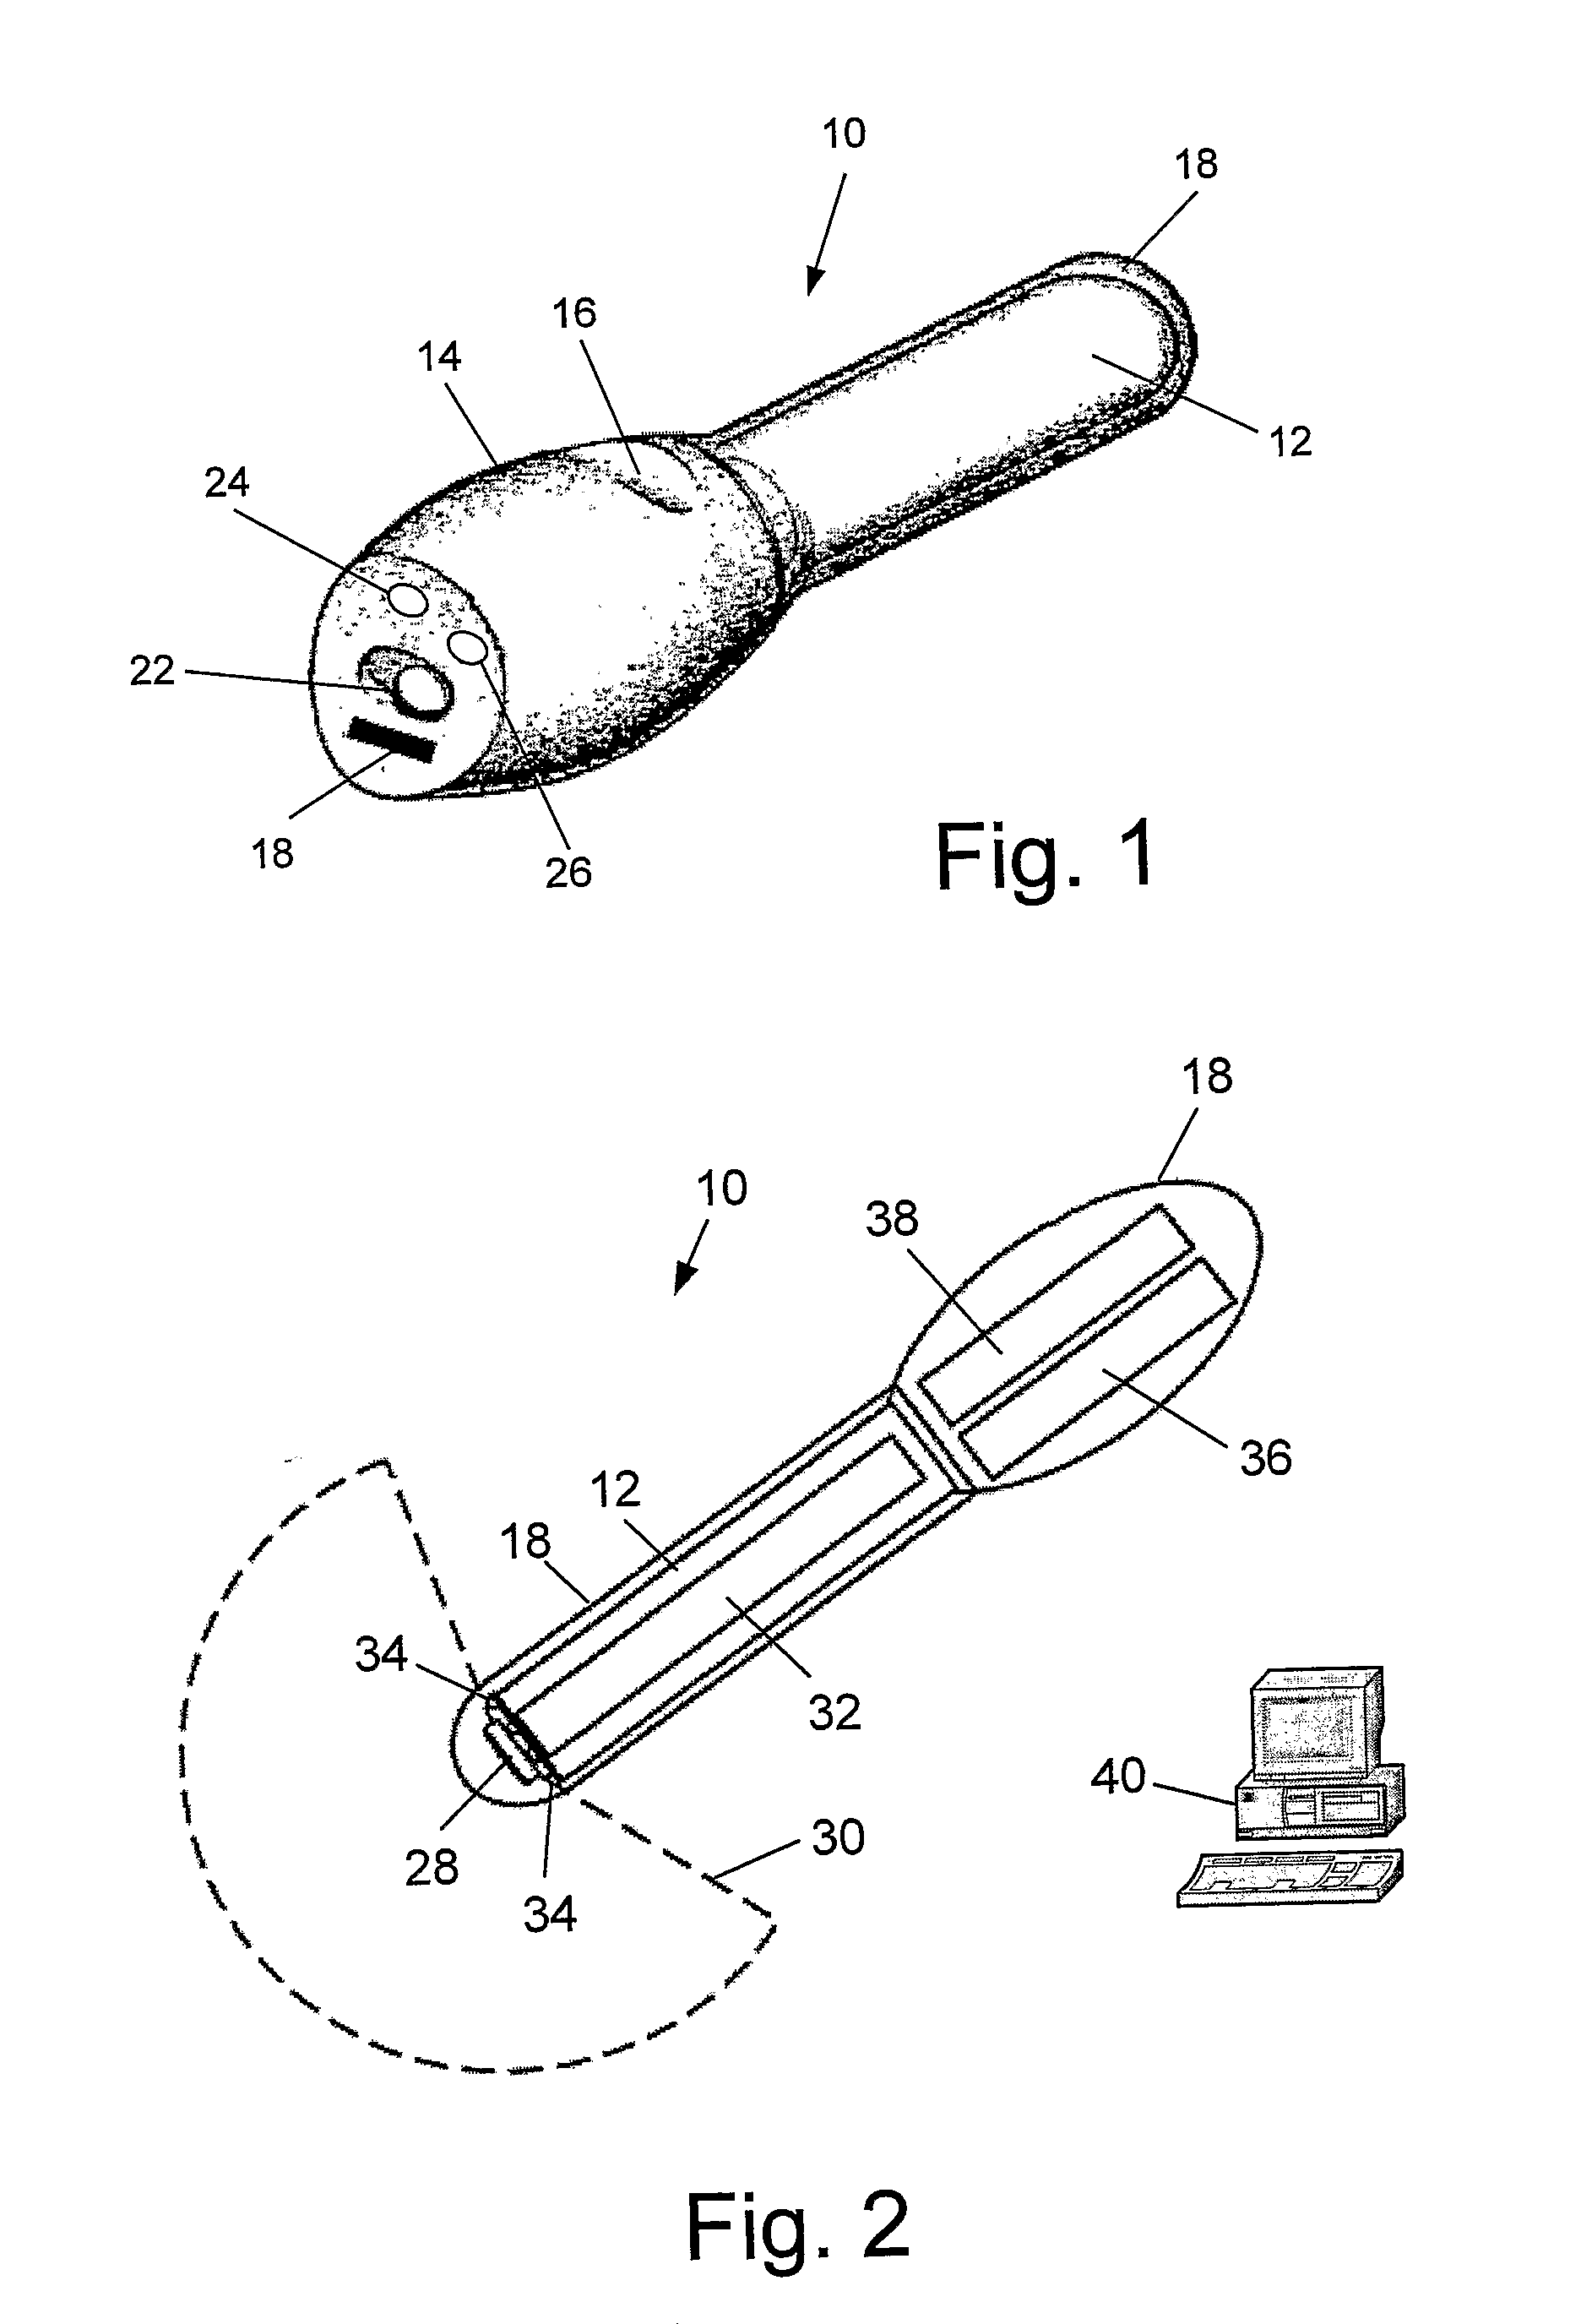 Medical device for discreetly performing a routine vaginal examination